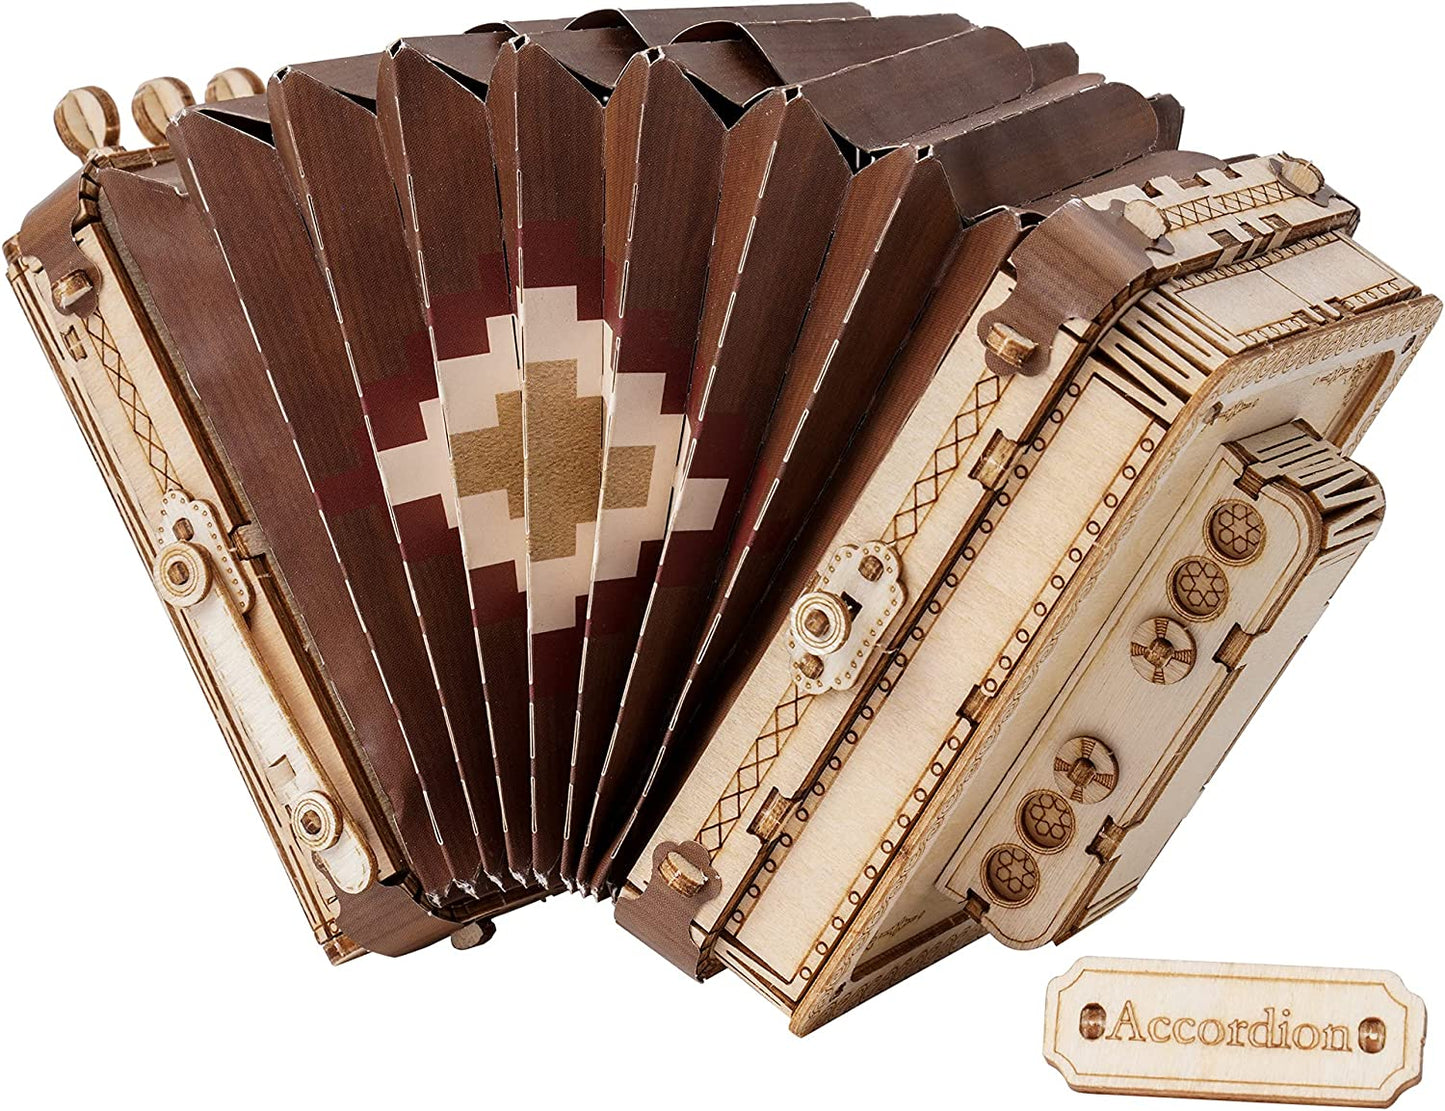 3D Wooden Puzzles for Adults Accordion Musical Instrument Model